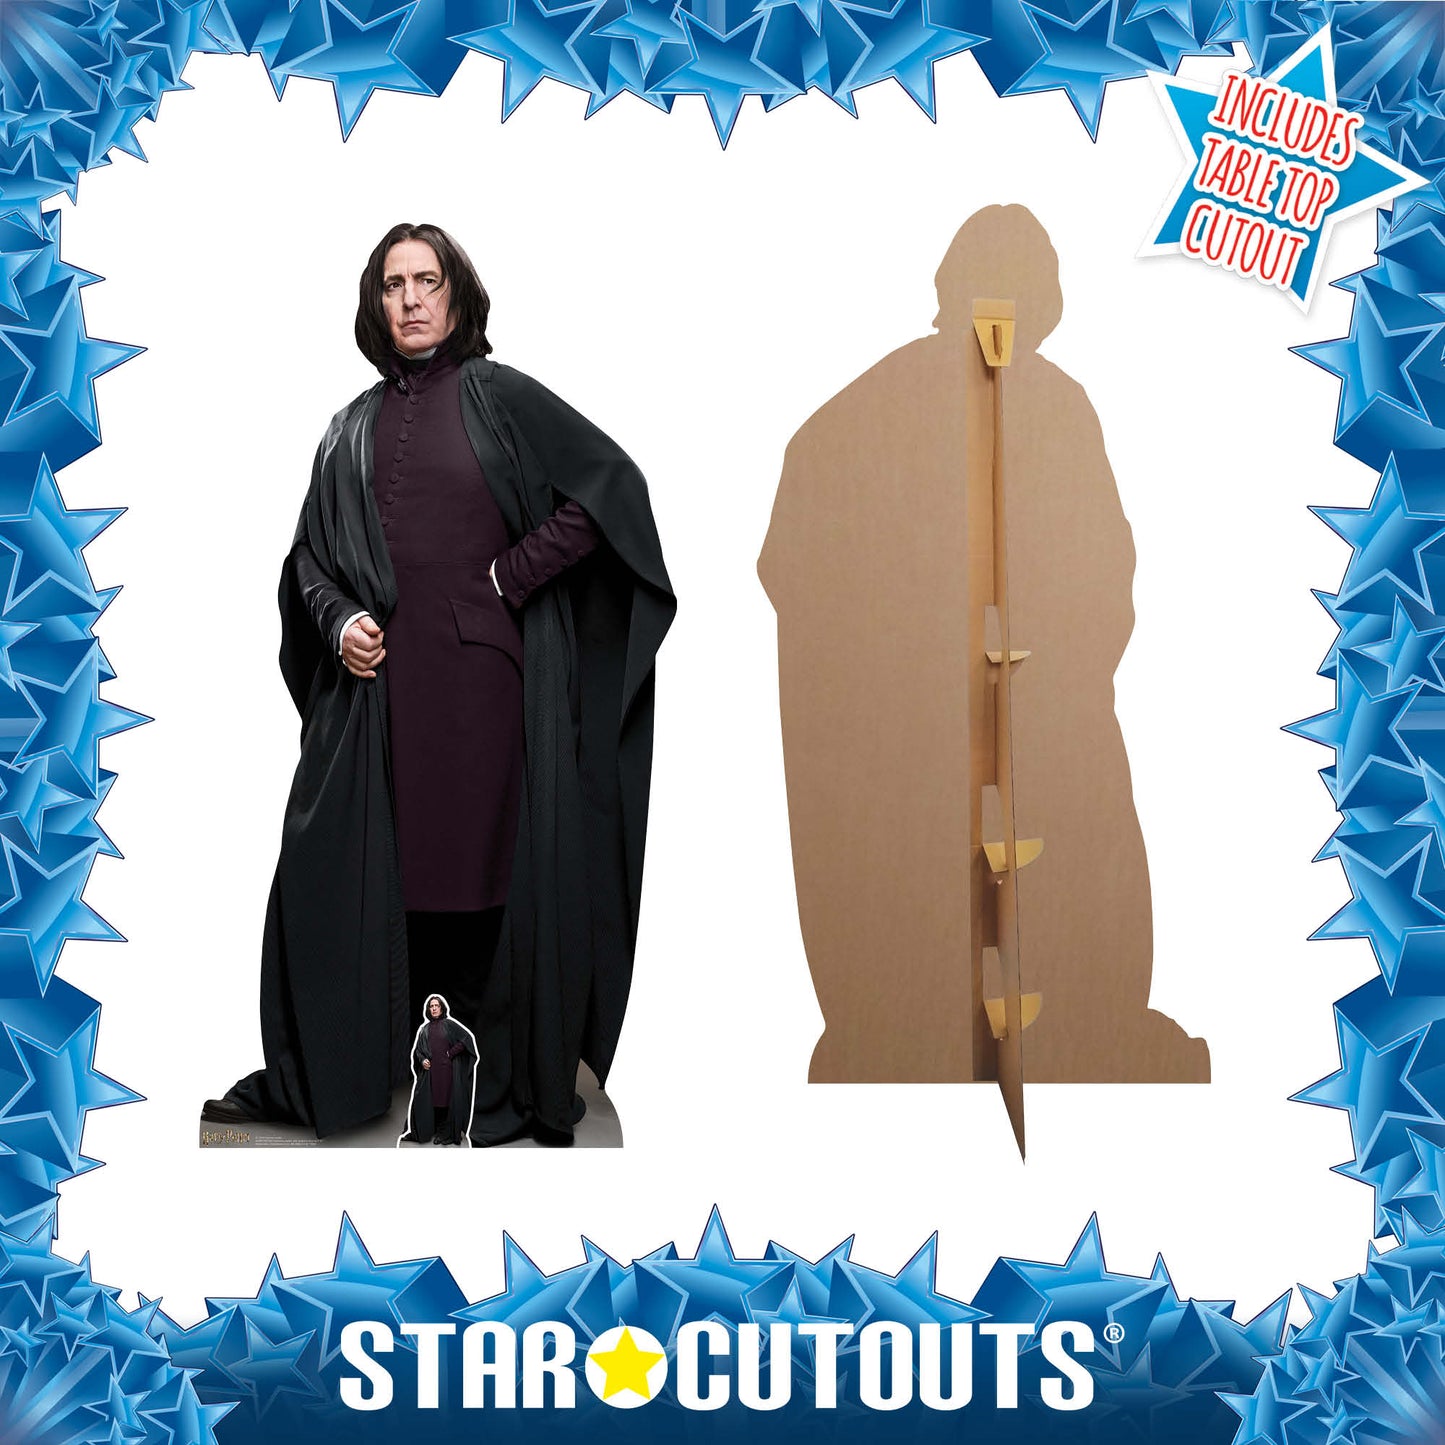 SC1470 Professor Snape Harry Potter Character Cardboard Cut Out Height 190cm